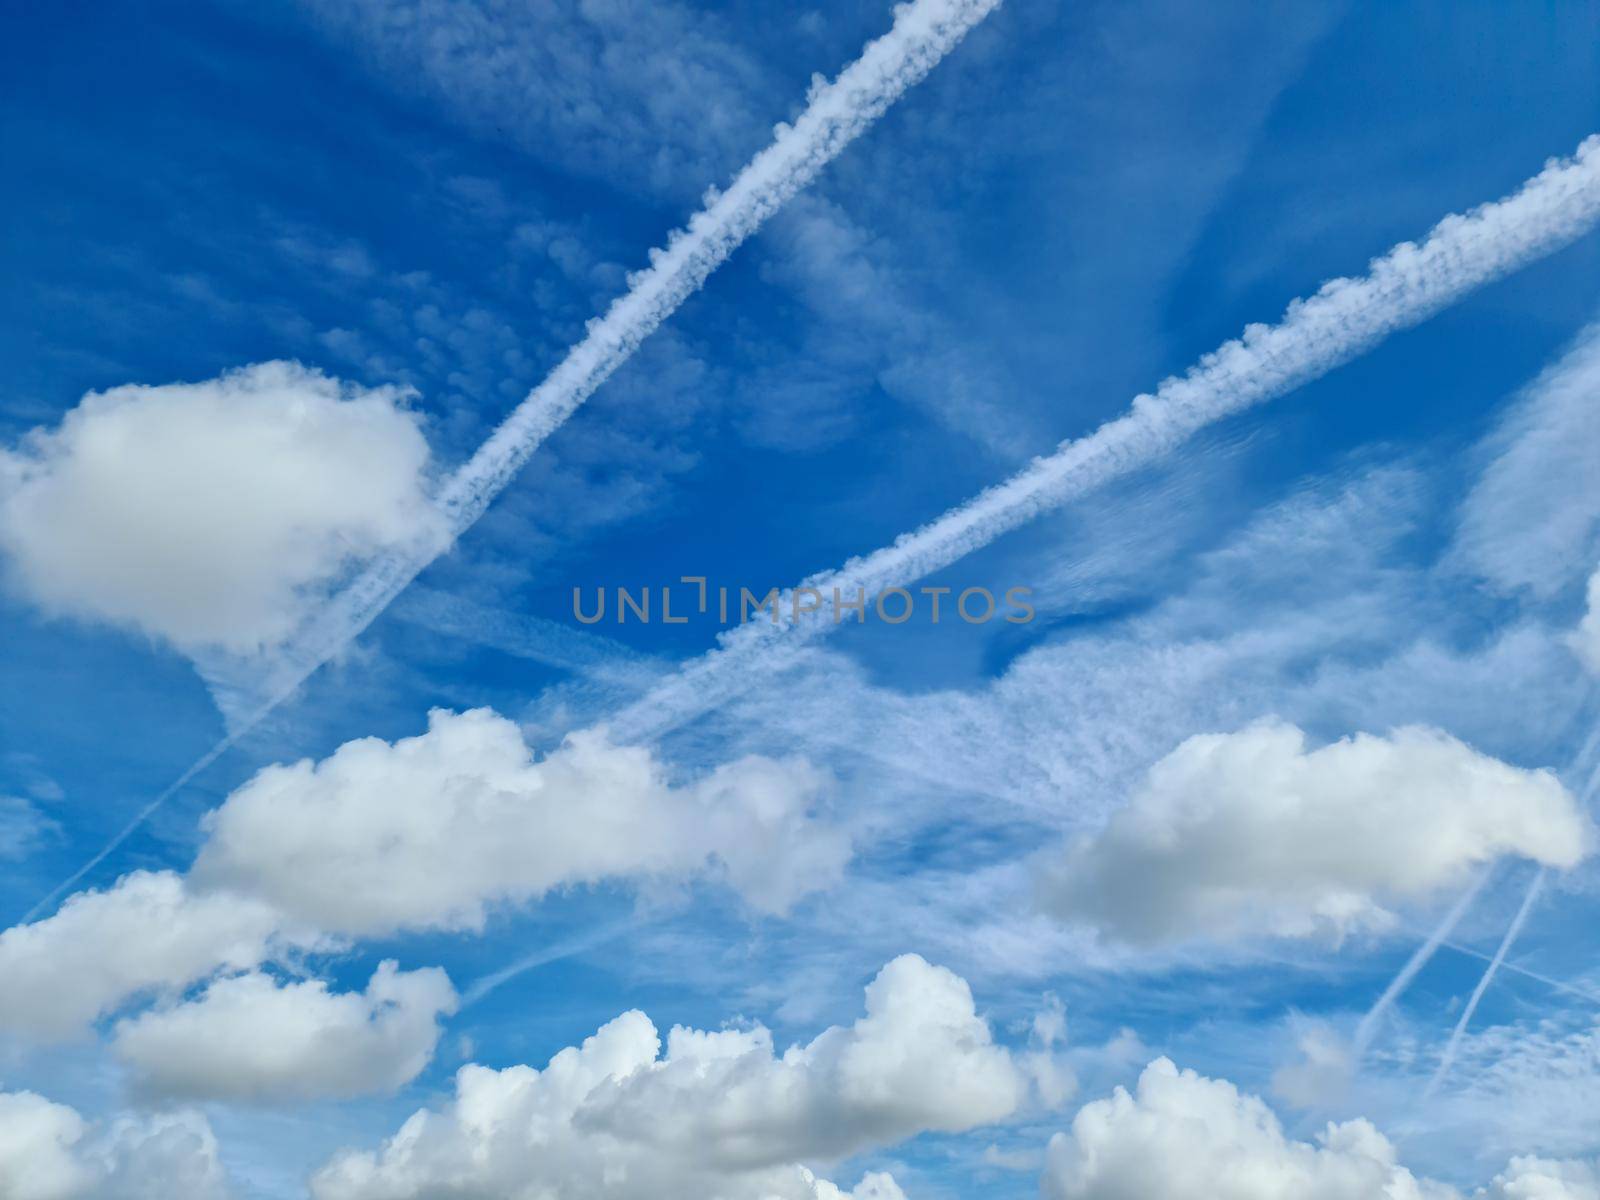 Aircraft condensation contrails in the blue sky inbetween some clouds by MP_foto71